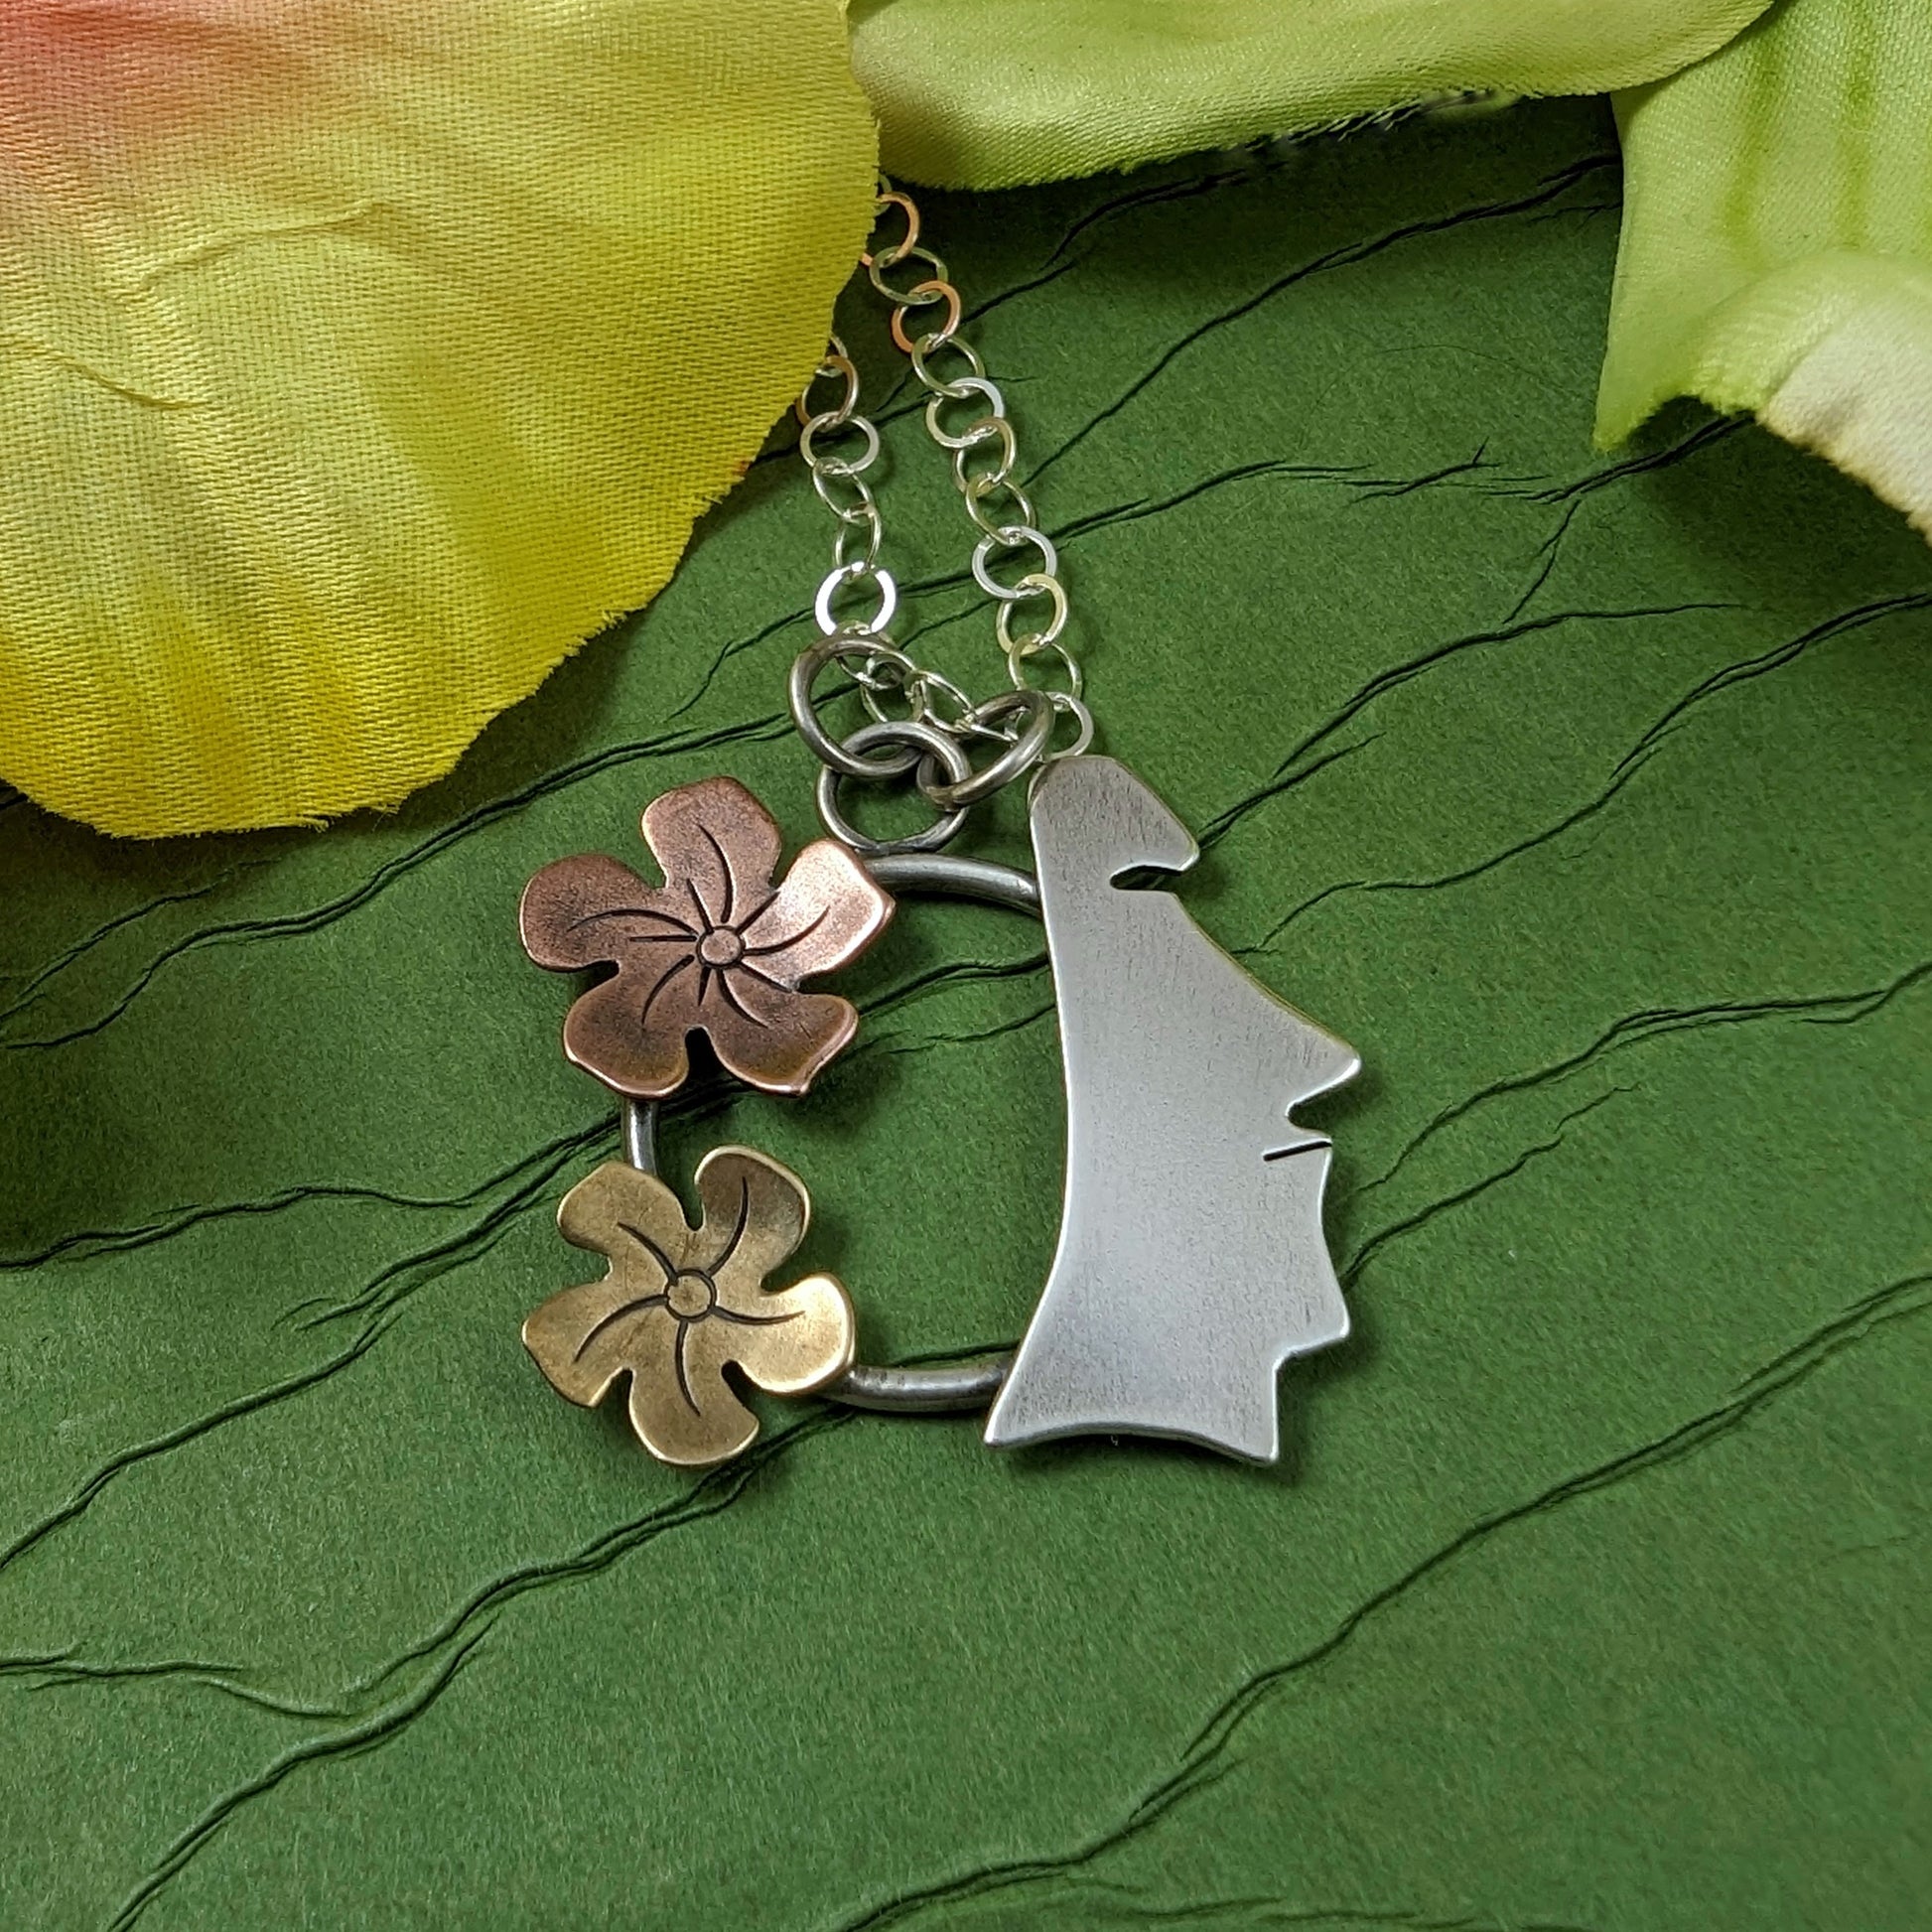 Sterling silver, copper, and brass necklace on a green background with flowers